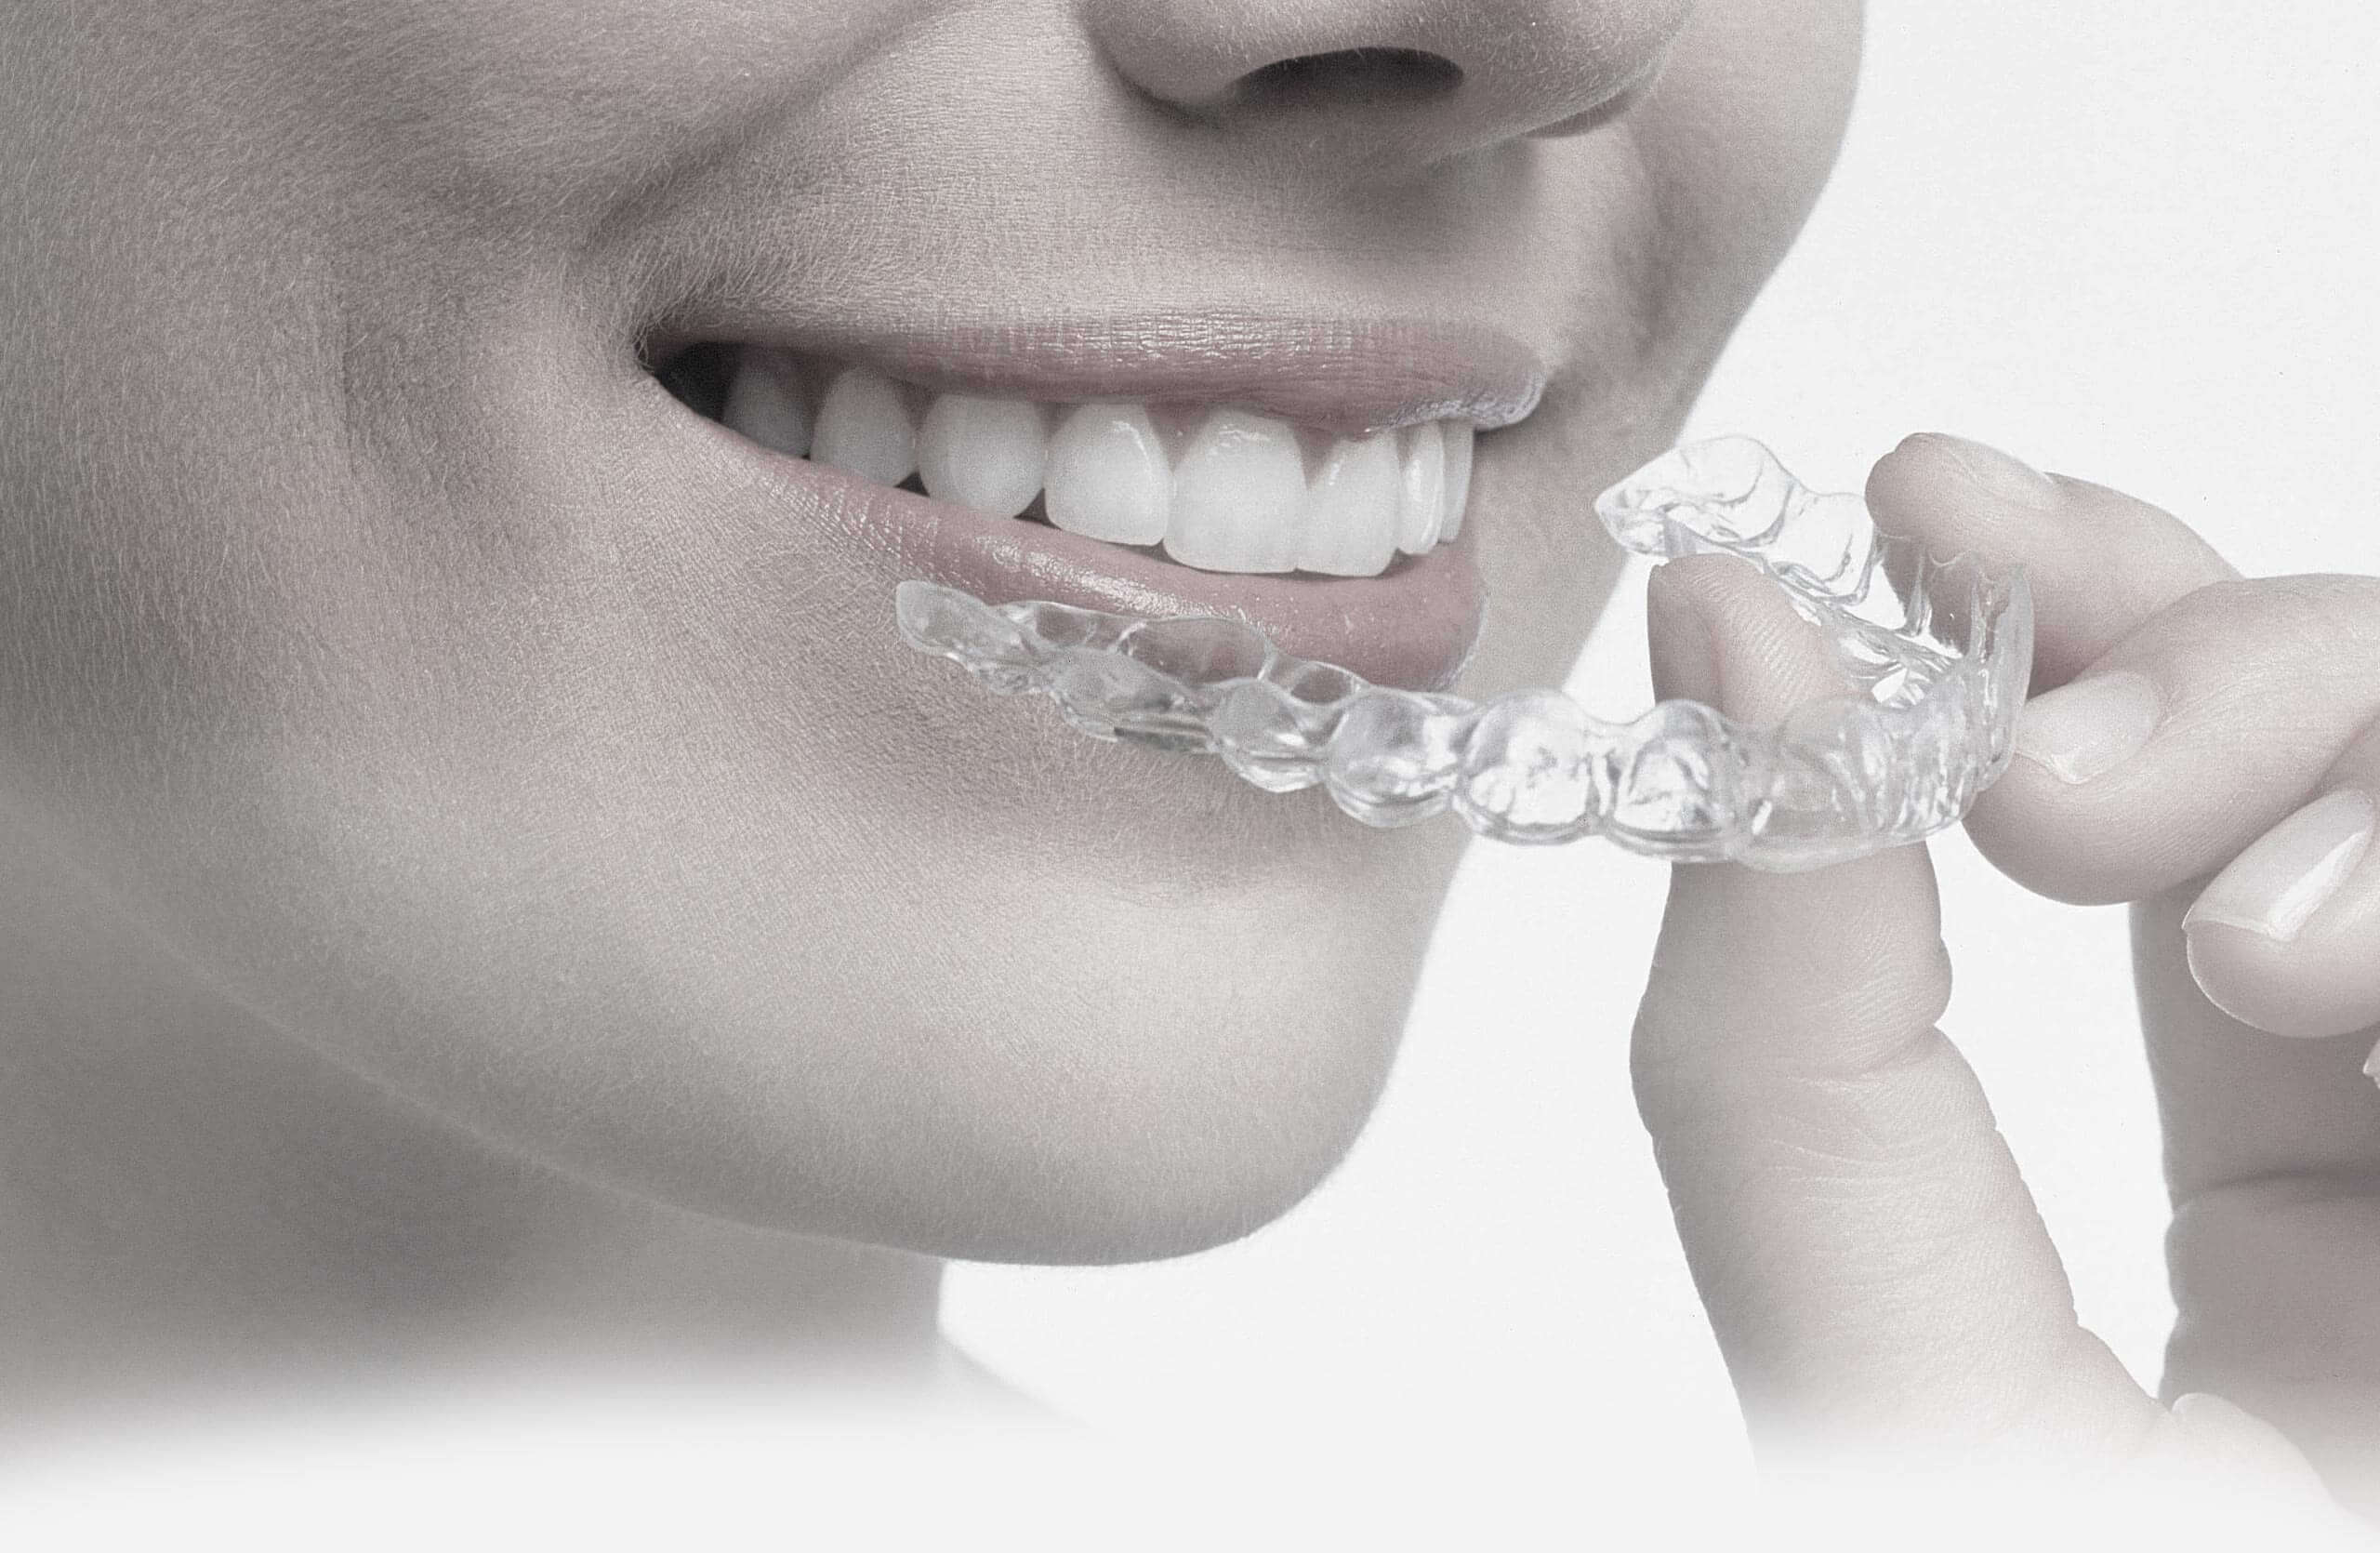 Modern state of the art orthodontic treatment in Berlin